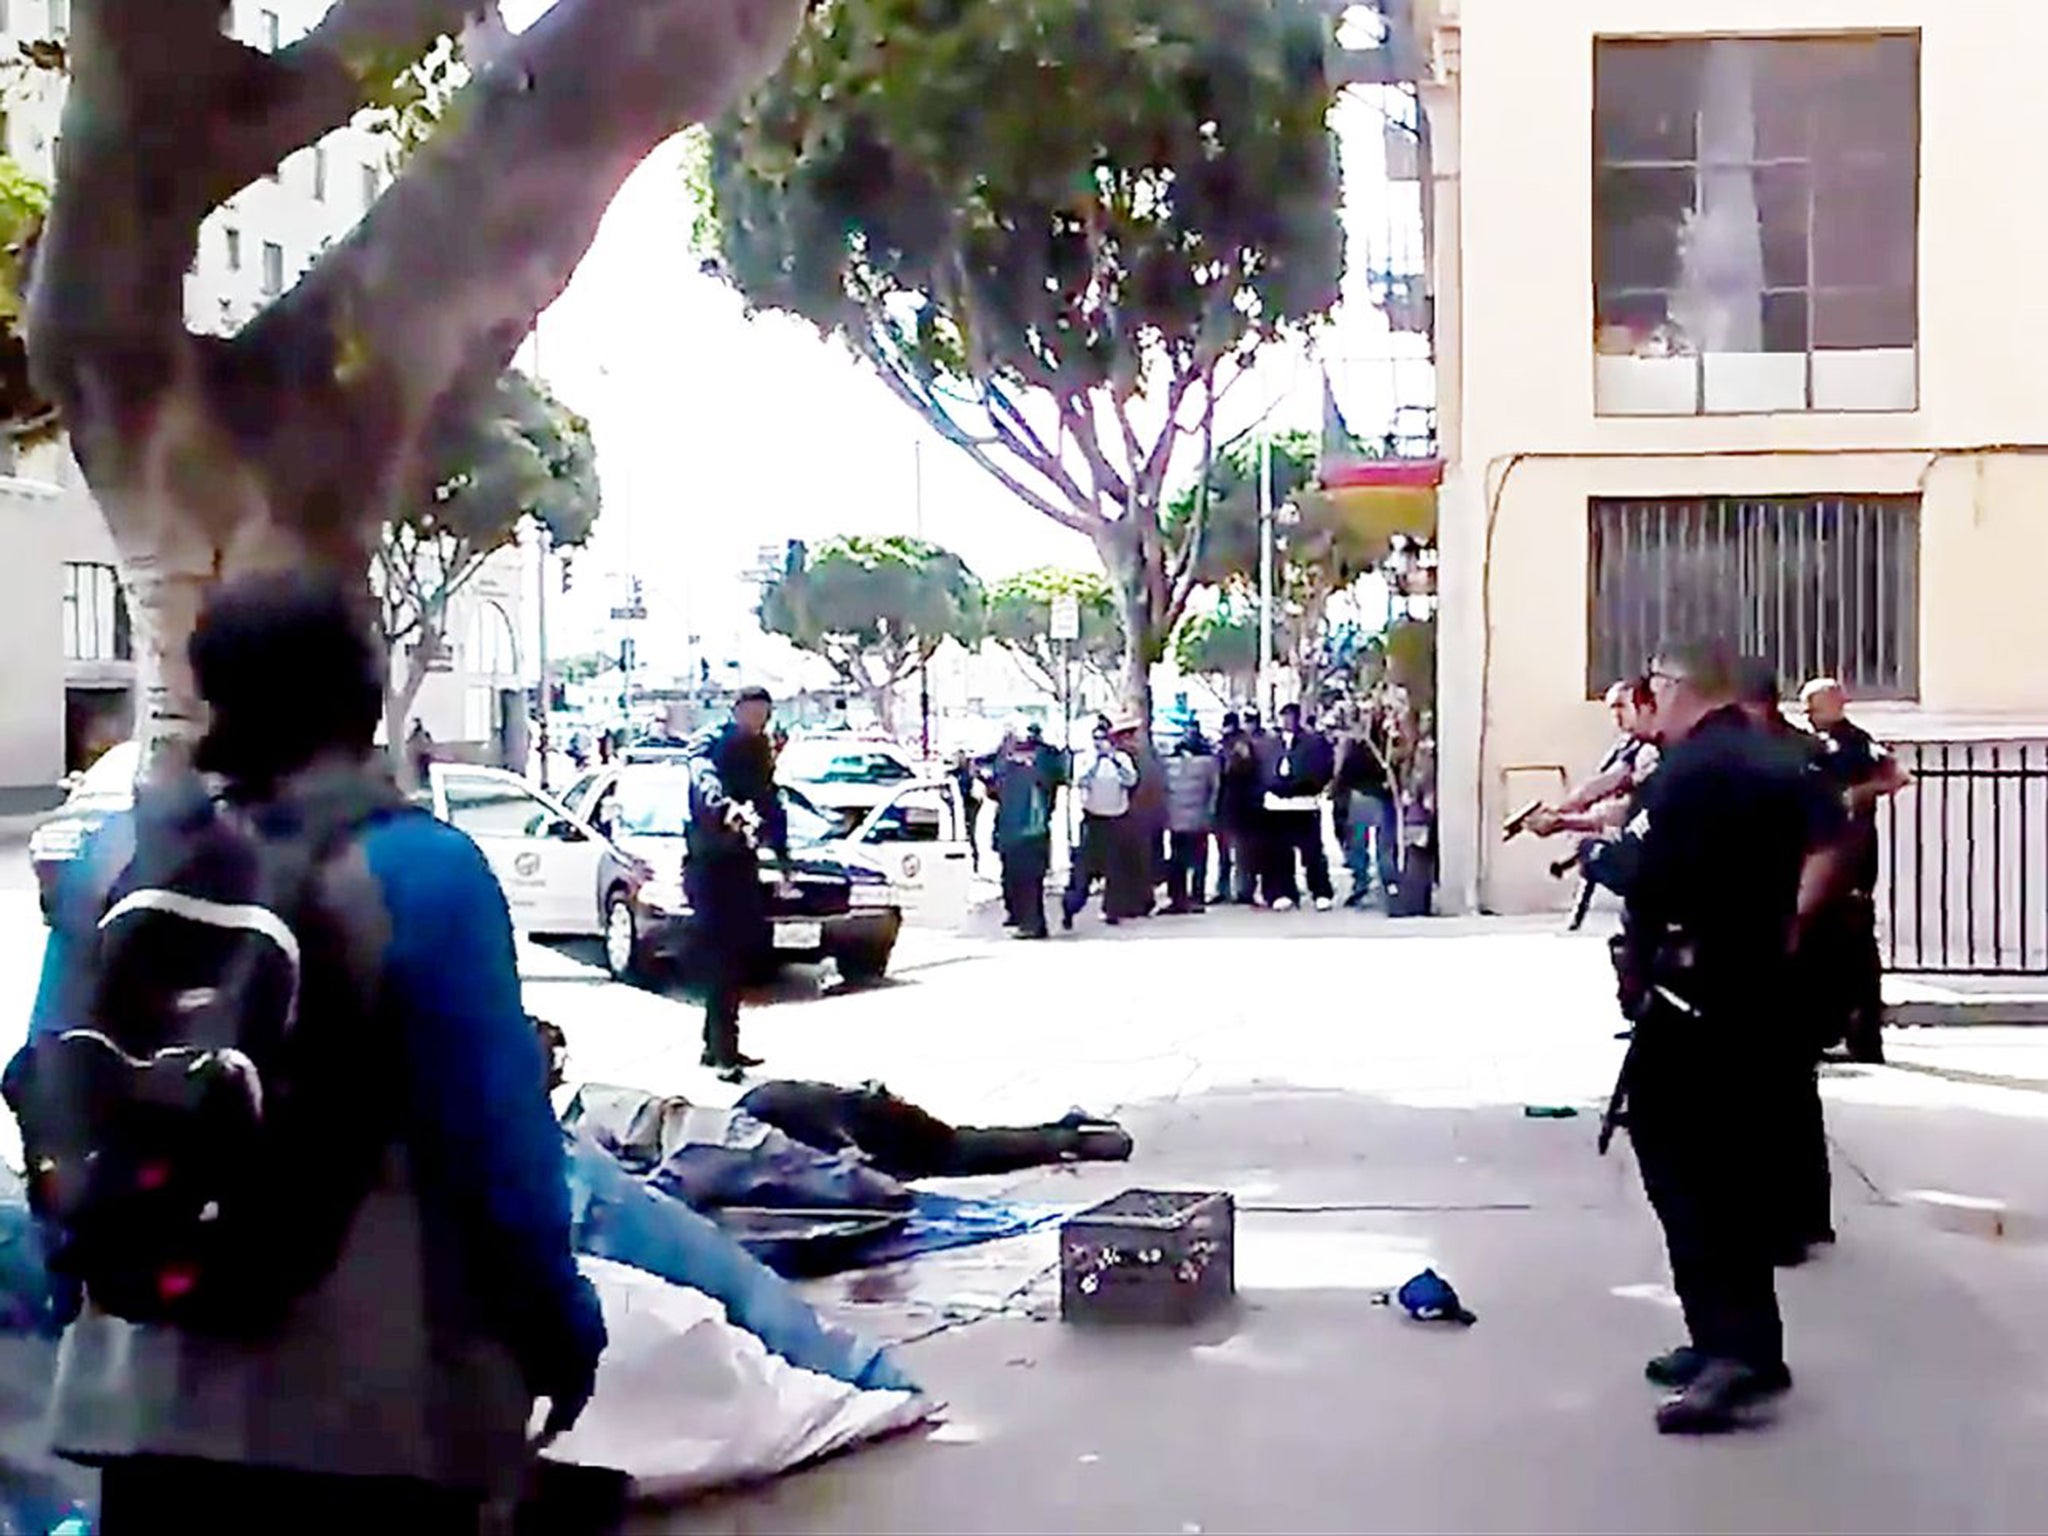 The moment a homeless man was shot dead by Los Angeles police officers was caught on camera